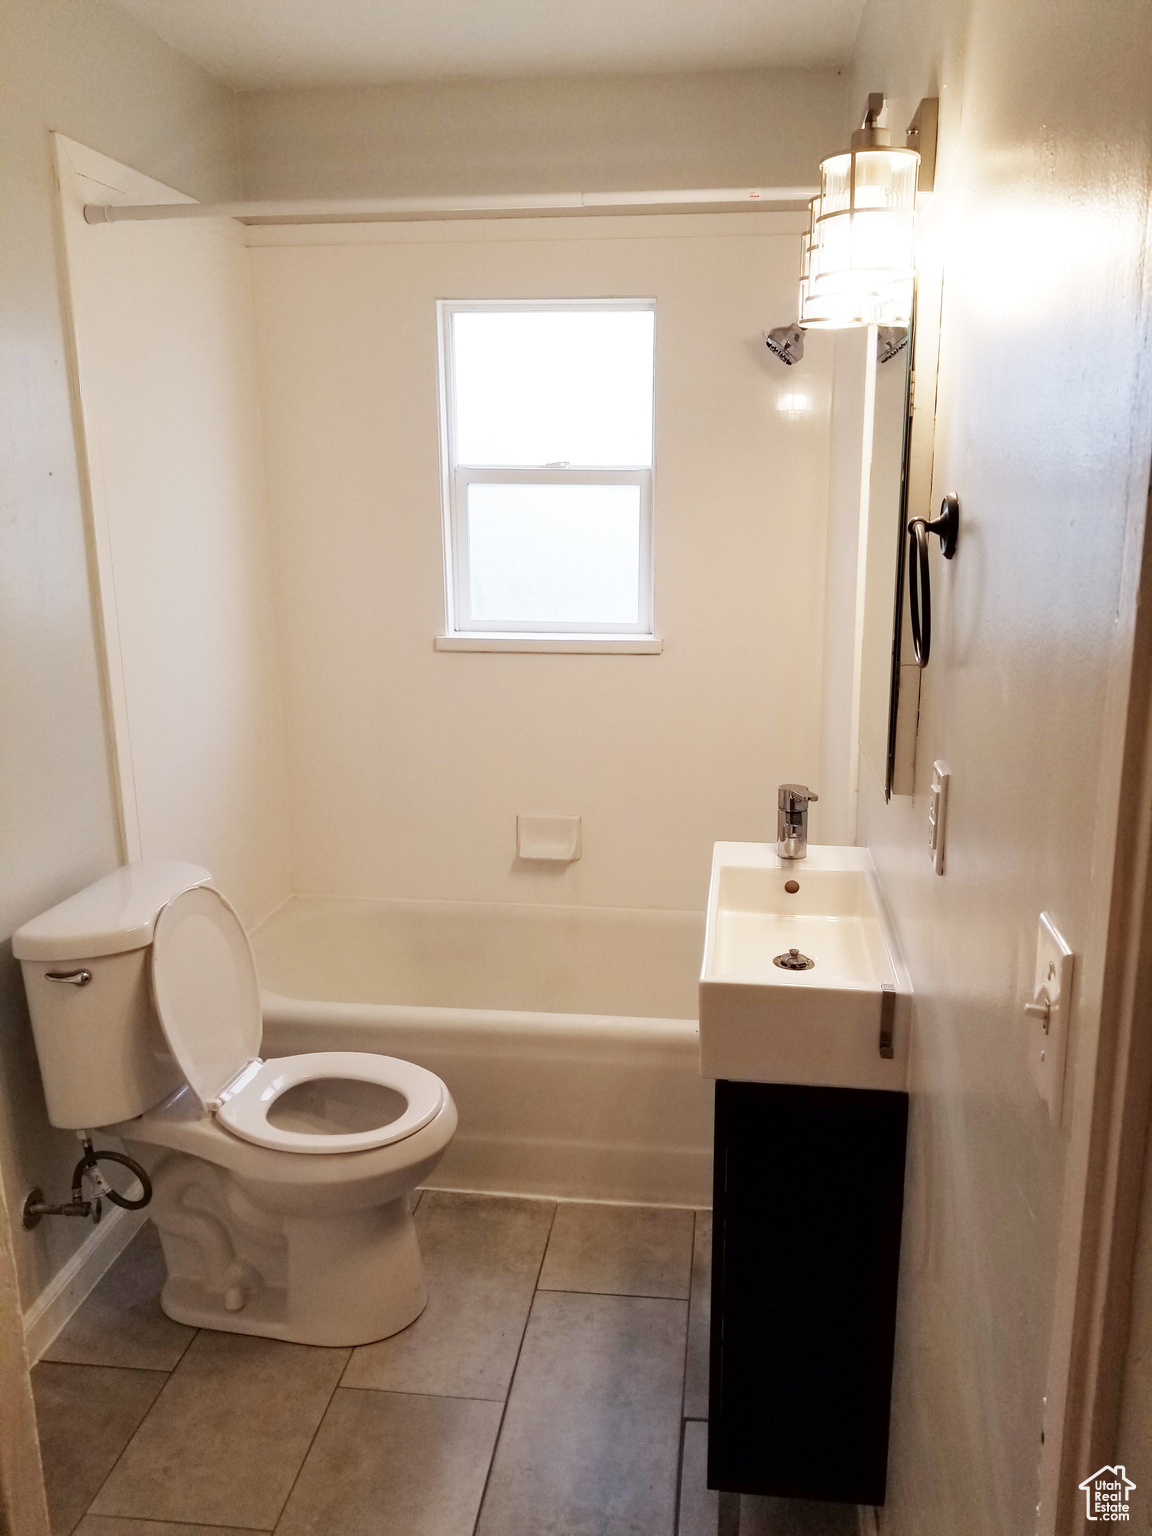 Full bathroom with tile flooring,  shower combination, vanity, and toilet